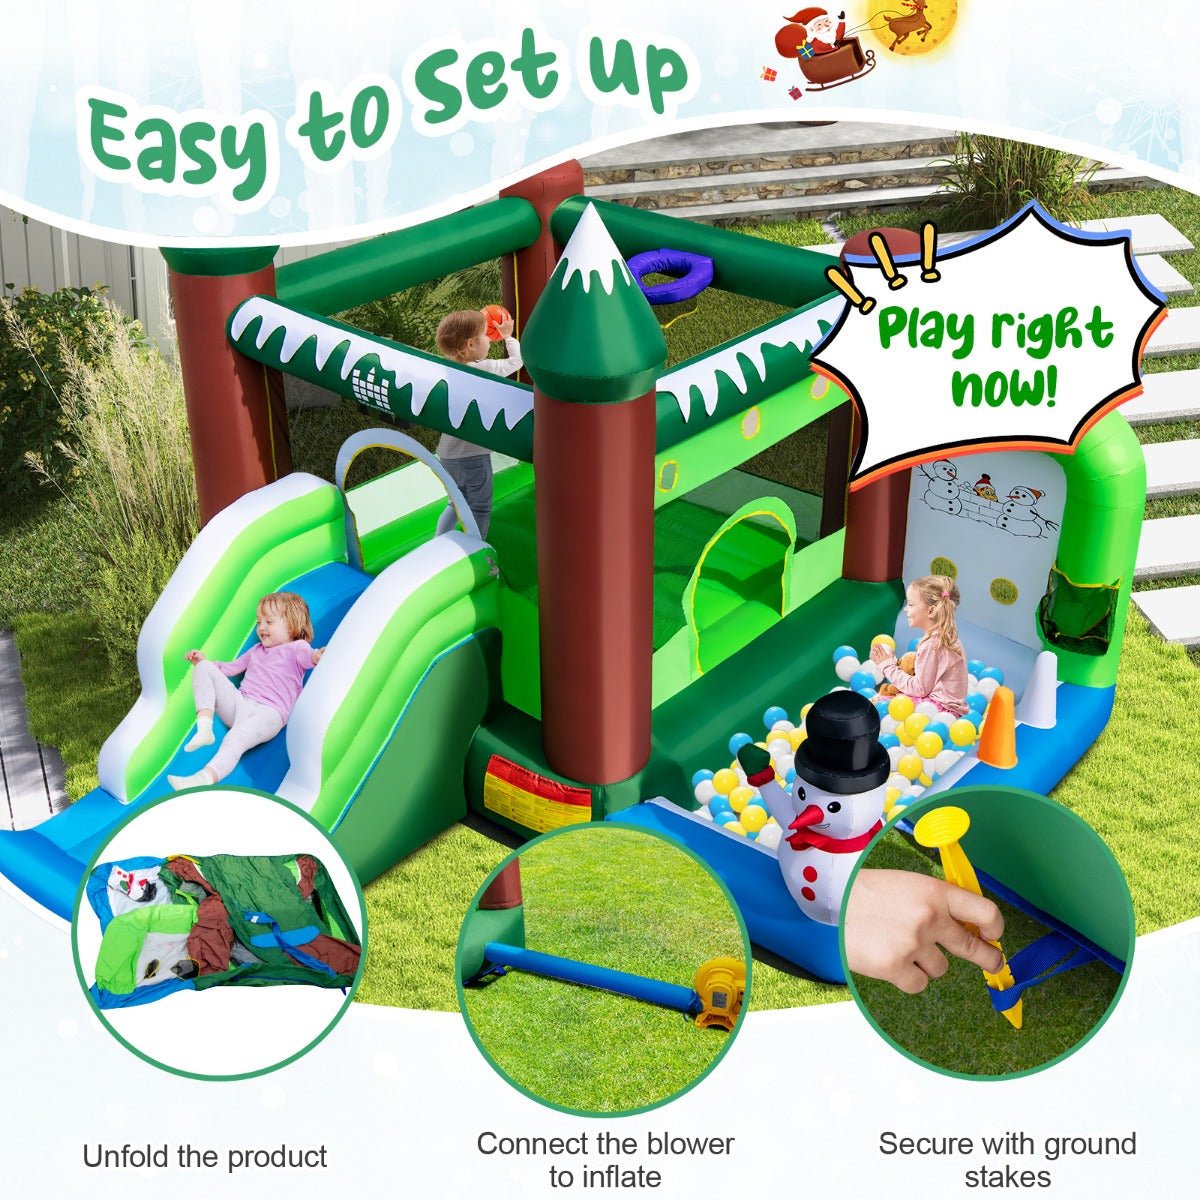 Enjoy Winter Fun with the Jumping Castle for Children - Shop Today!